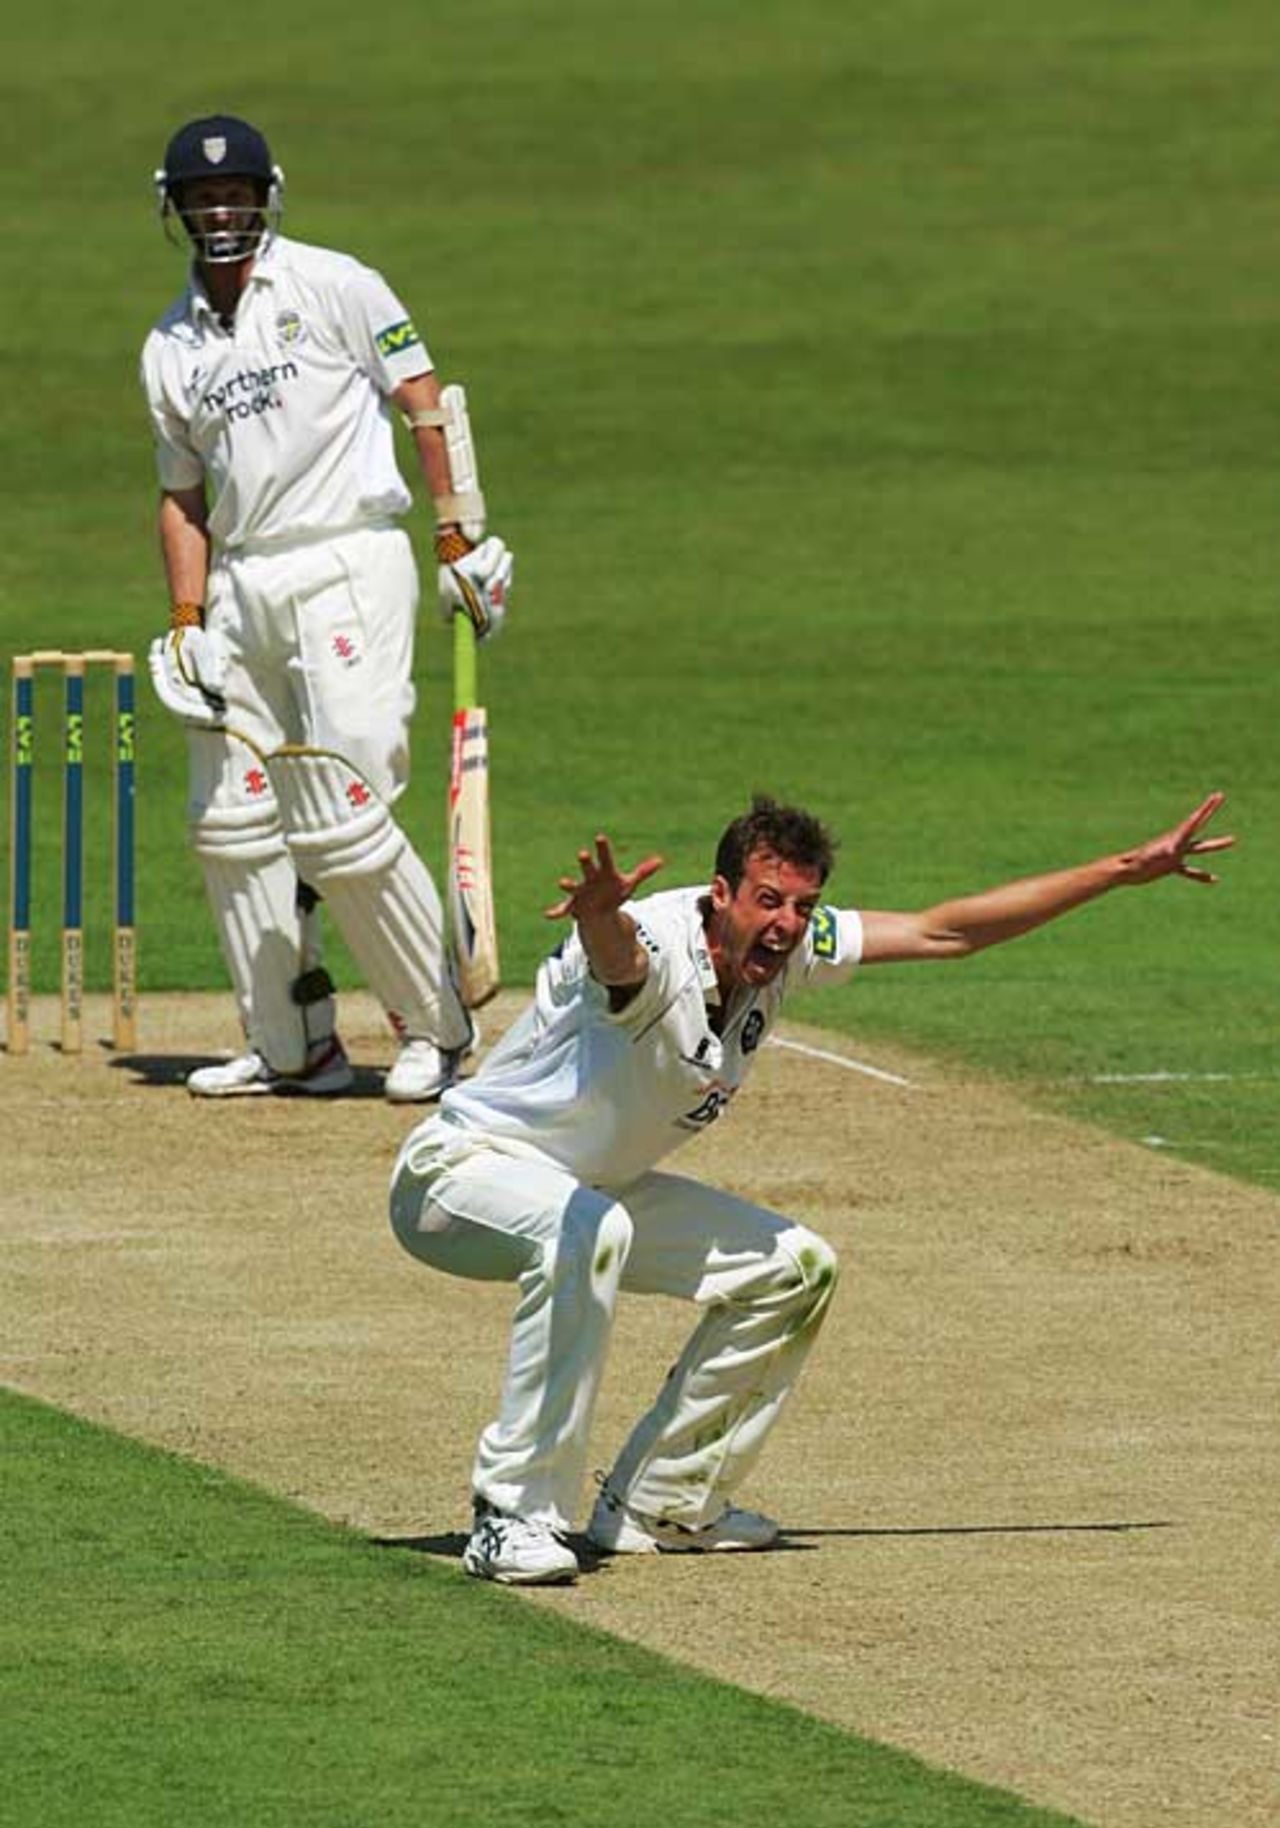 Neil Saker pleads for the wicket of Dale Benkenstein, Surrey v Durham, County Championship, The Oval, July 8, 2007